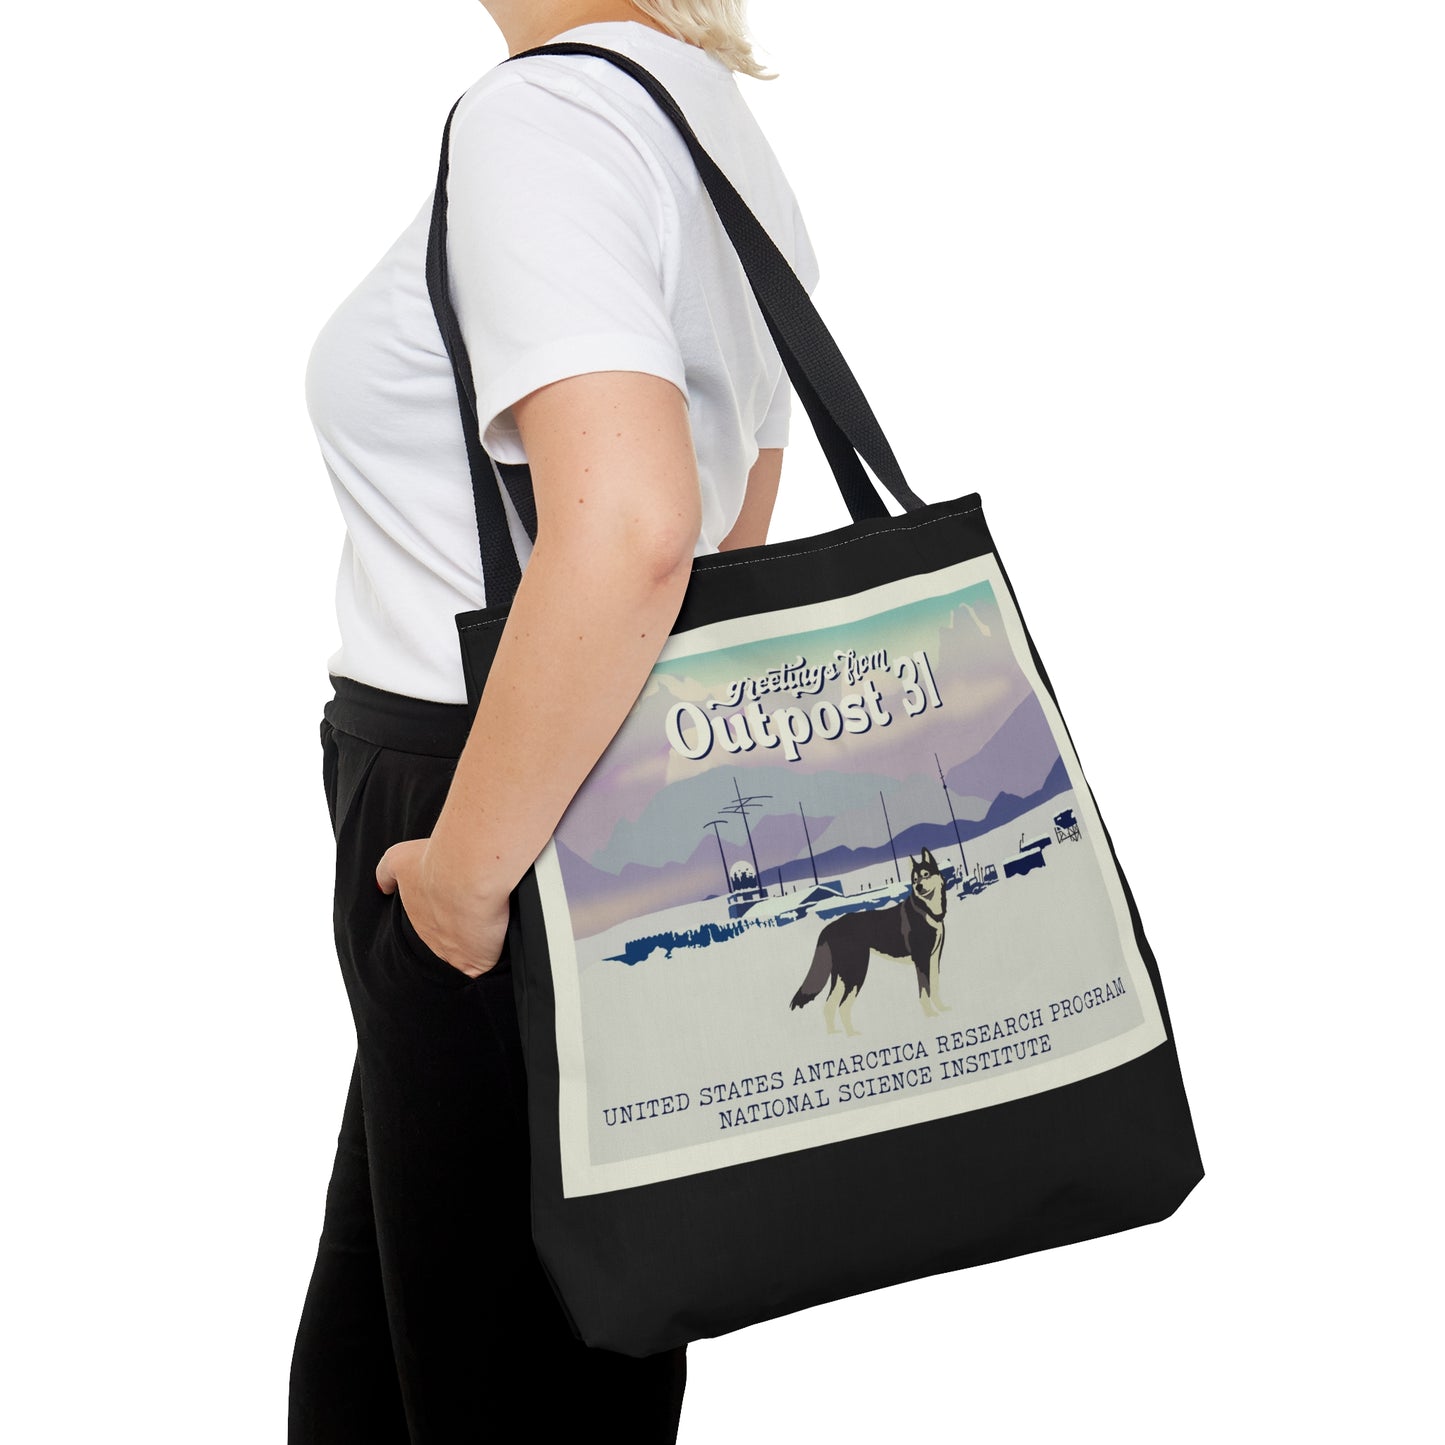 Outpost 31 Tote Bag (Black)